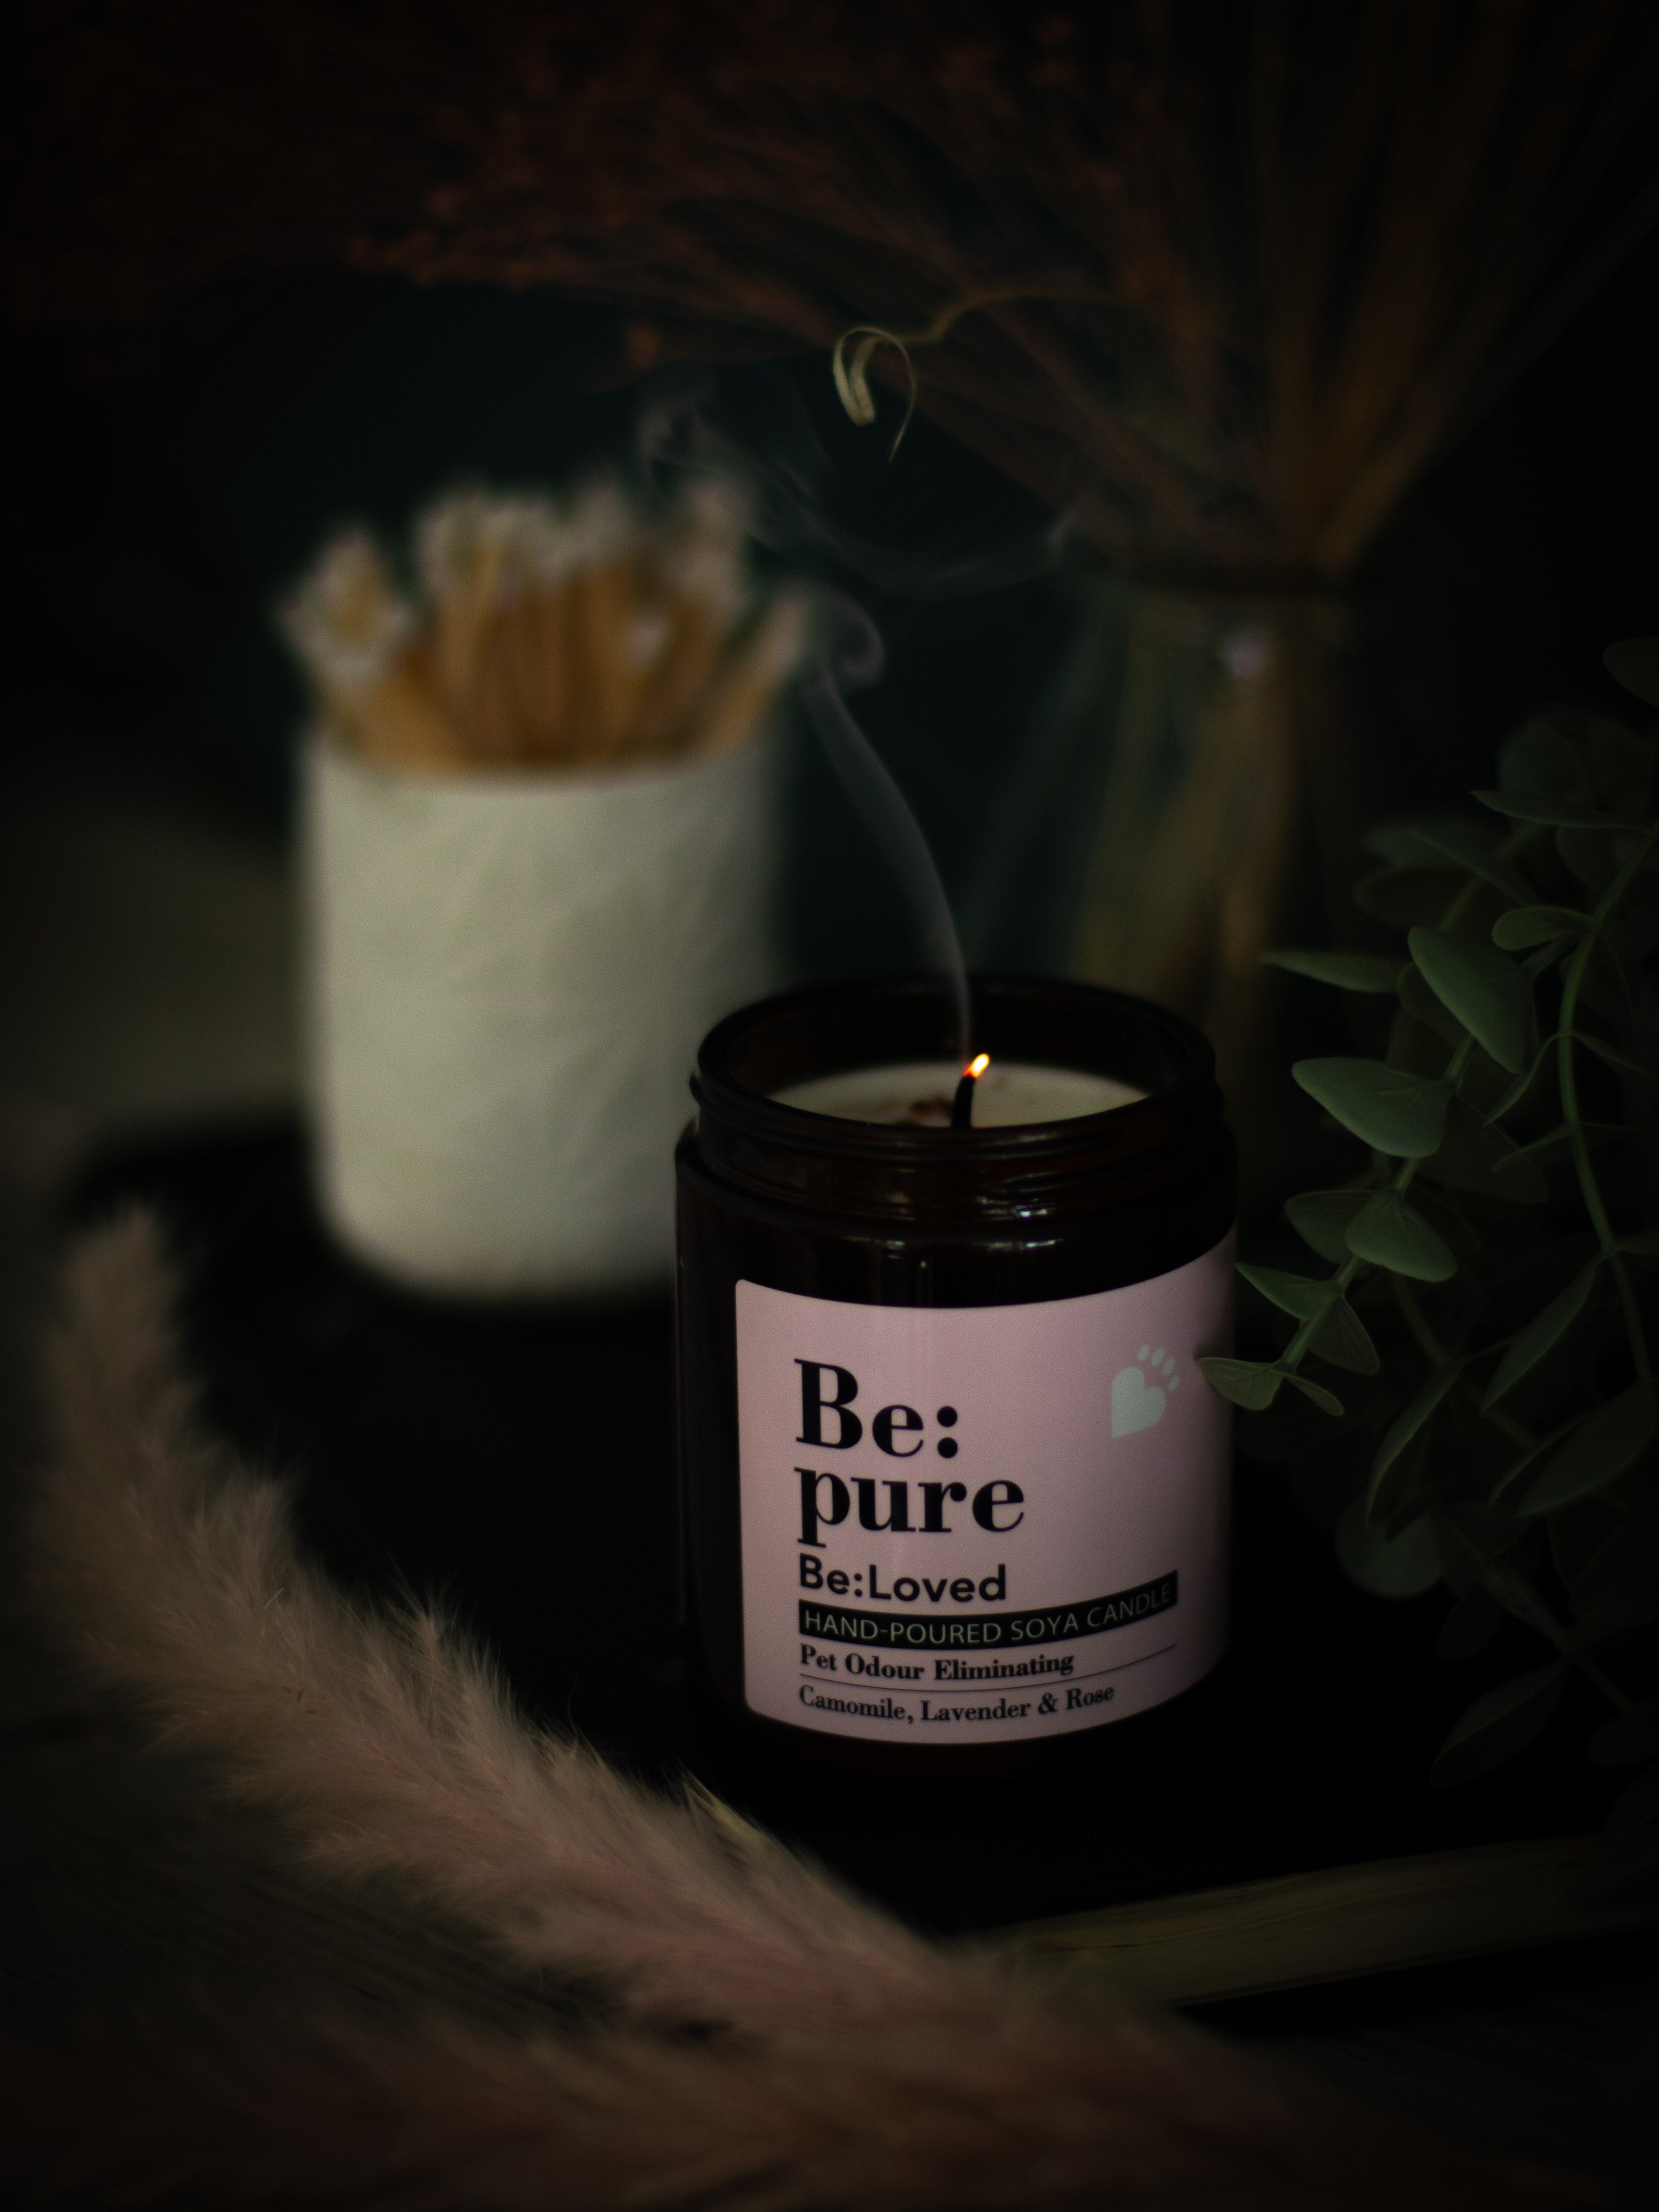 Be:Pure candle with a wave of smoke above it after just being blown out